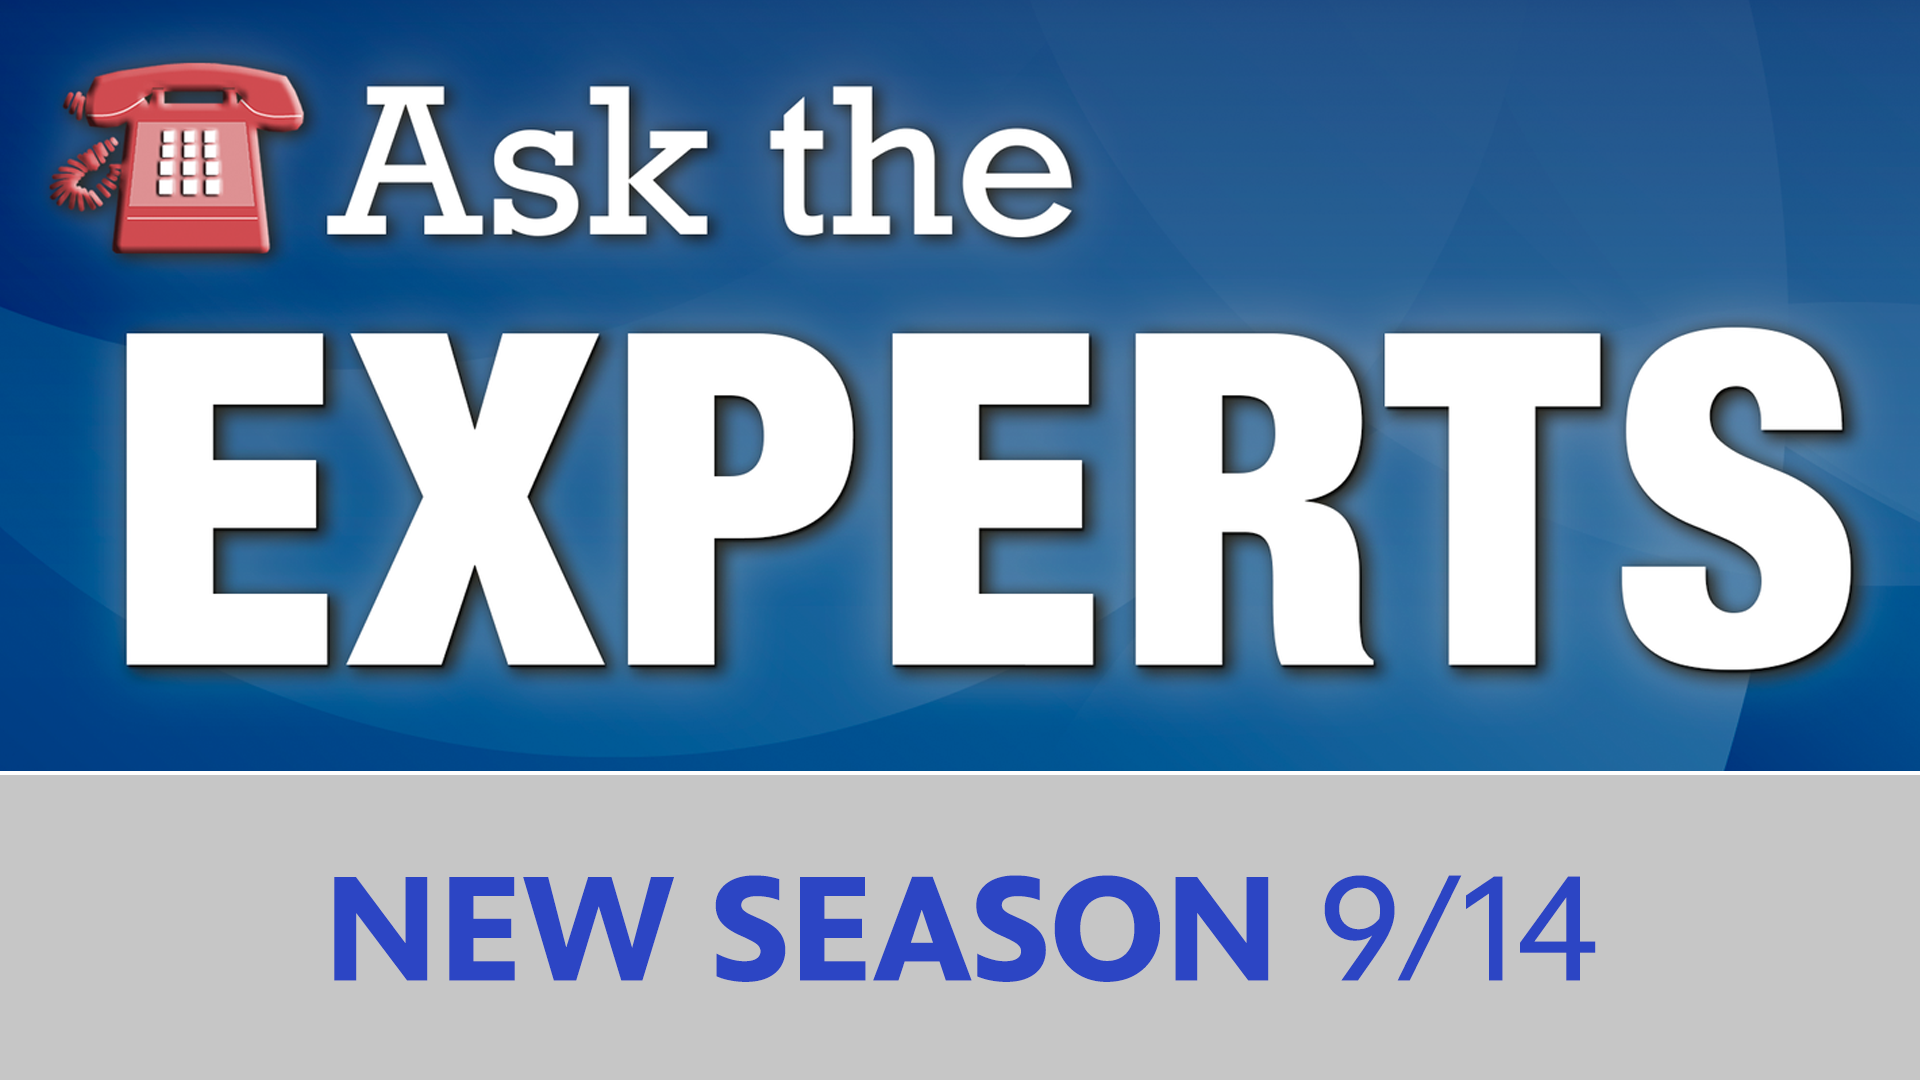 Ask the Experts New Season 9/14